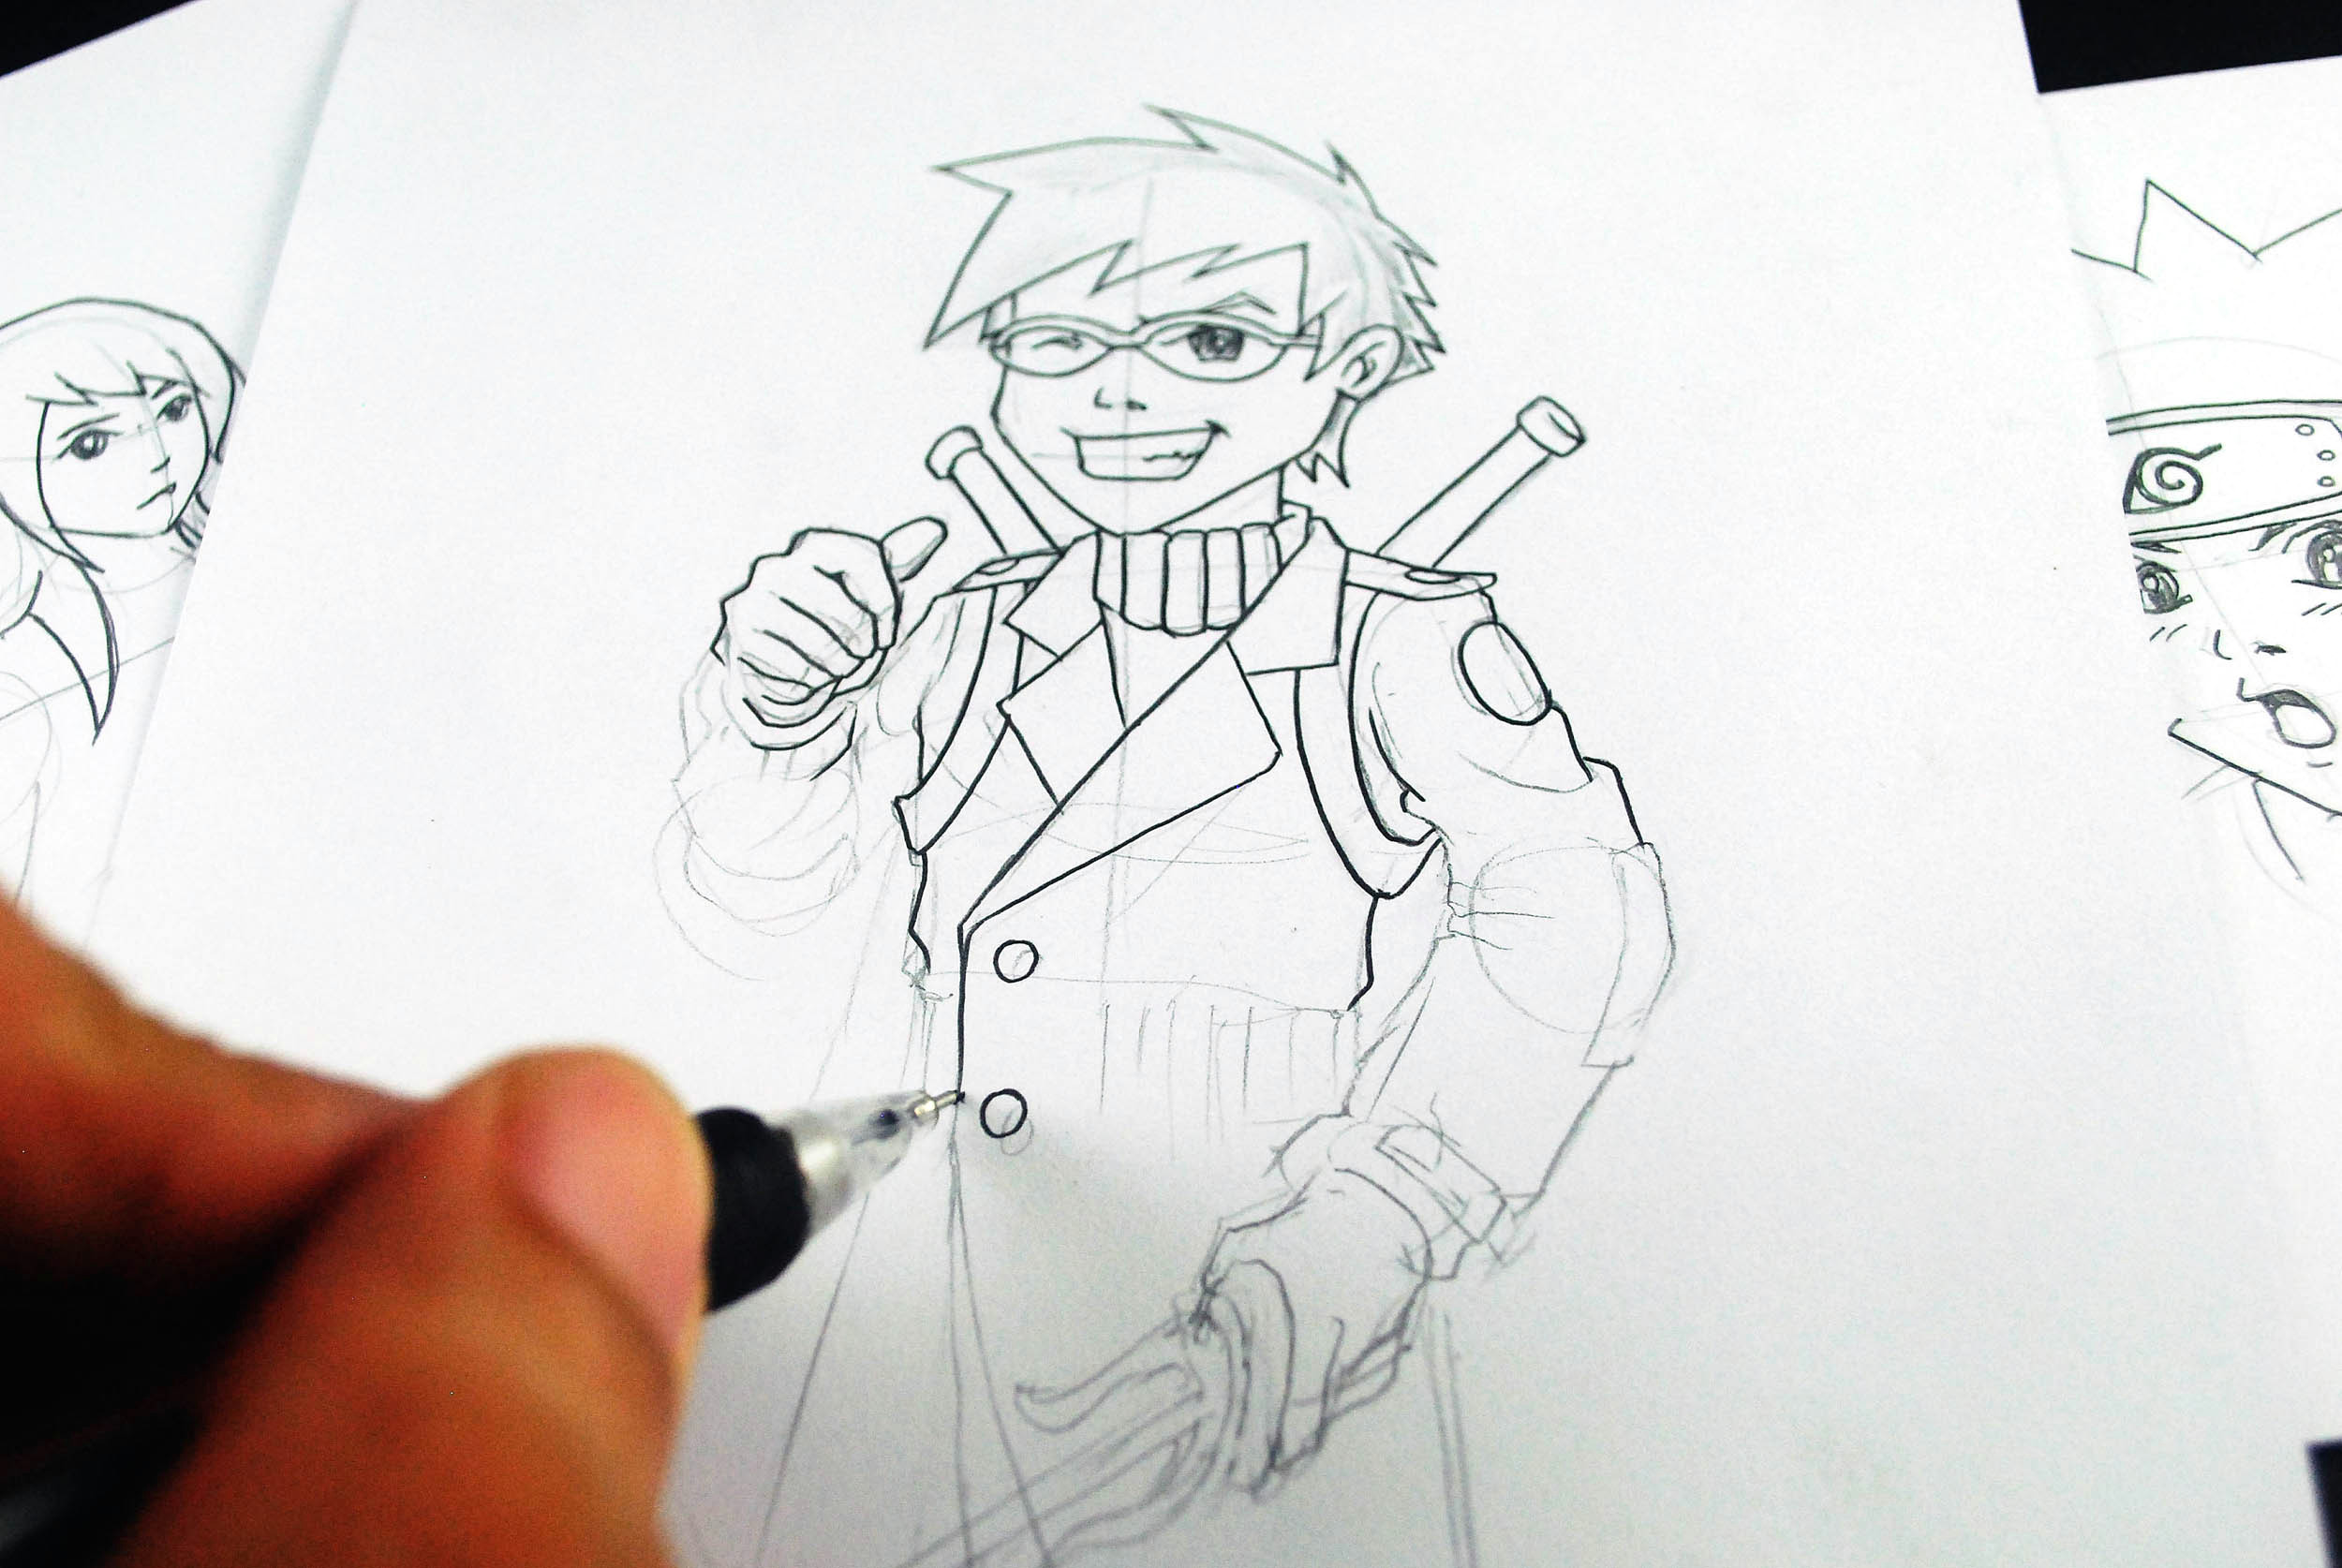 My Anime Drawing Quiz How to Learn to Draw Manga and Develop Your Own Style 5 Steps